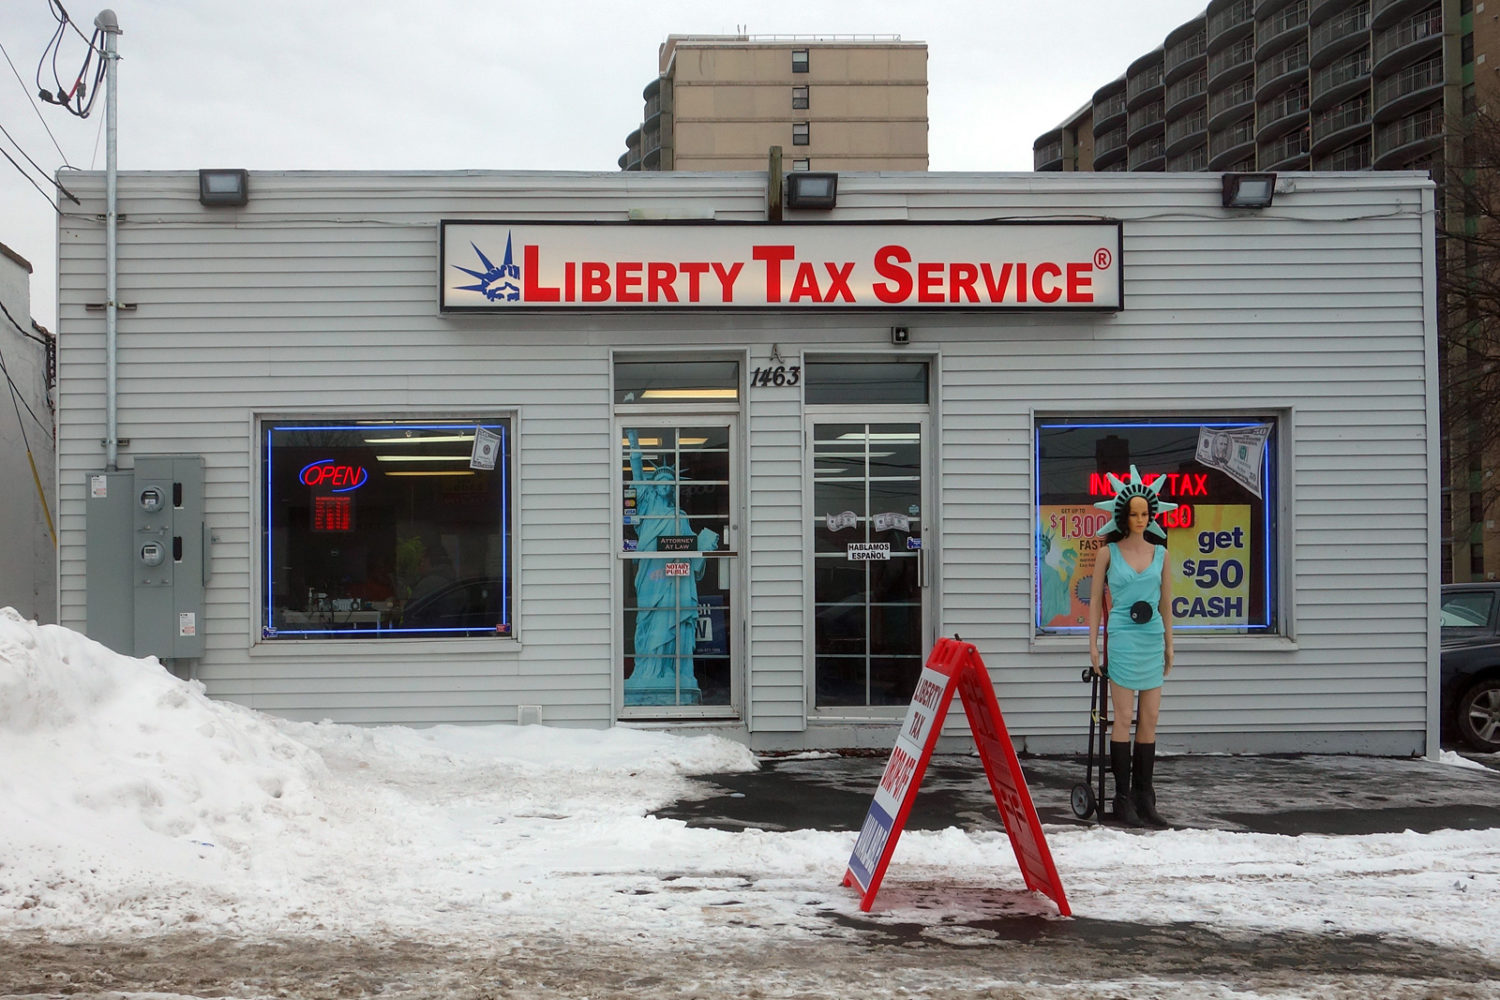 Liberty Tax Service on Hudson Avenue in Rochester, New York